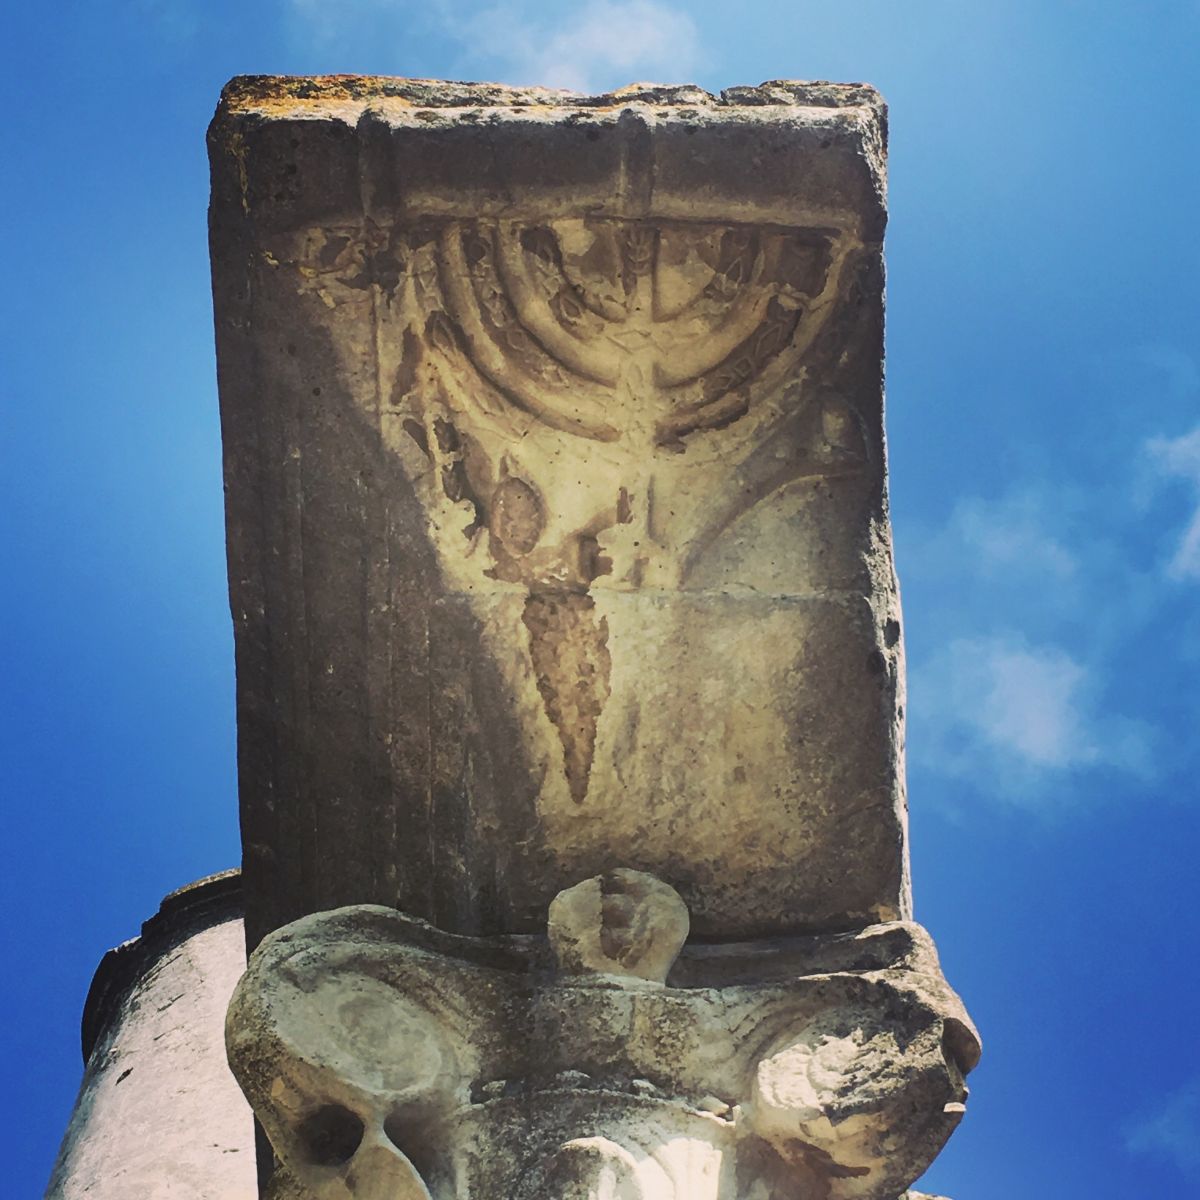 Detail of a menorah found on a column at the Synagogue at Ostia Antica. Image by Catherine Bonesho, unpublished.